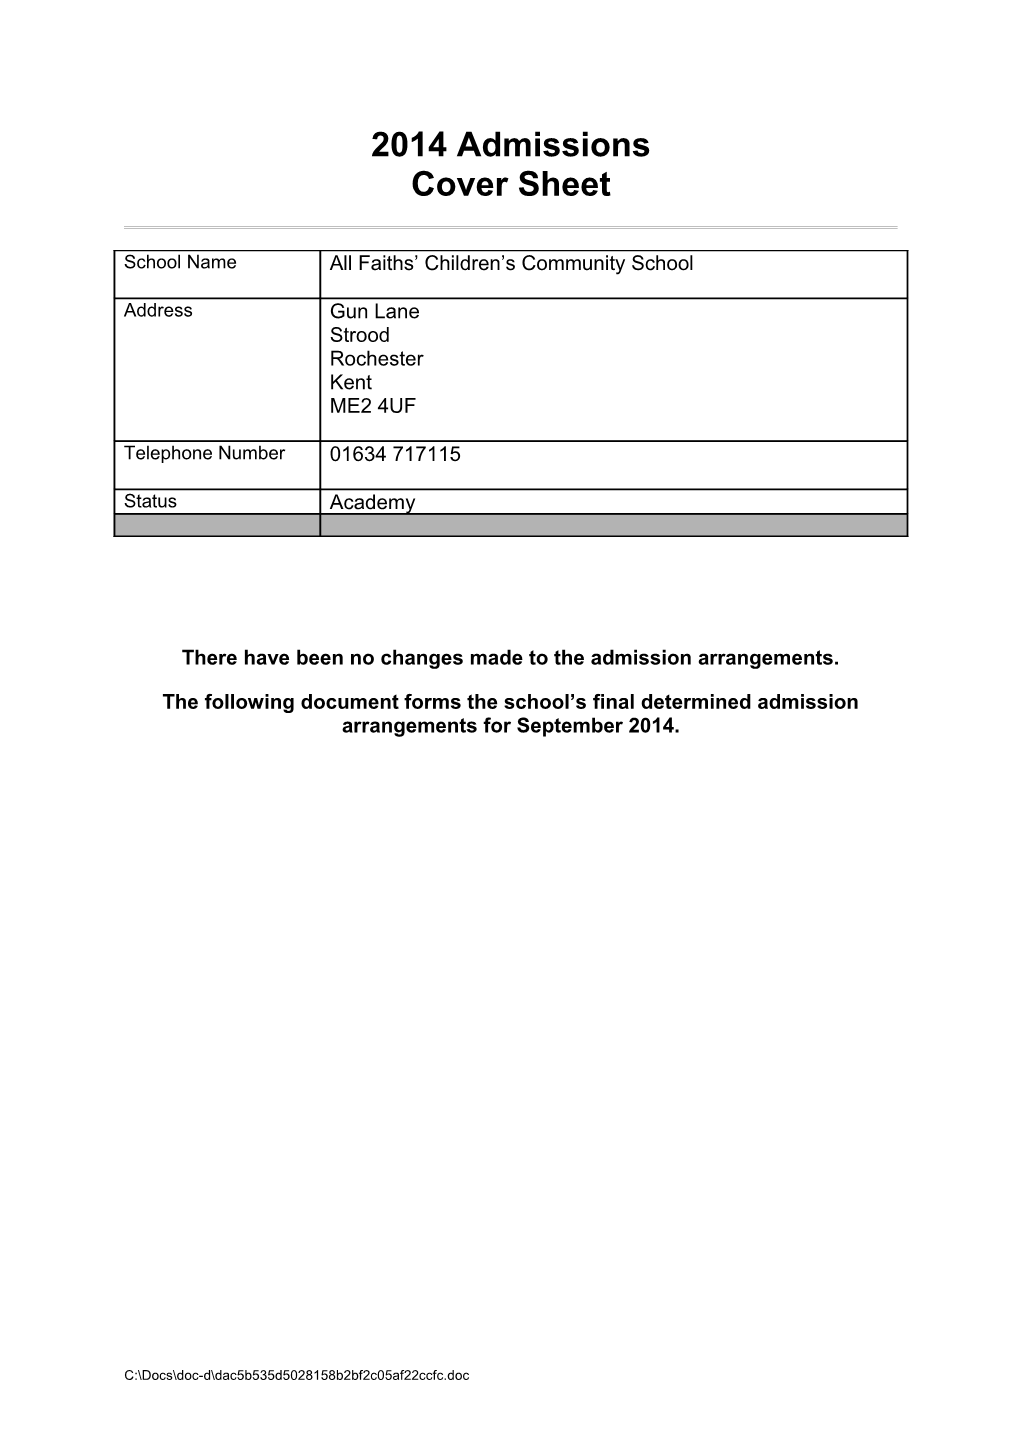 Determined Admission Arrangements for Cliffe Woods Primary School for the Academic Year 2014/15